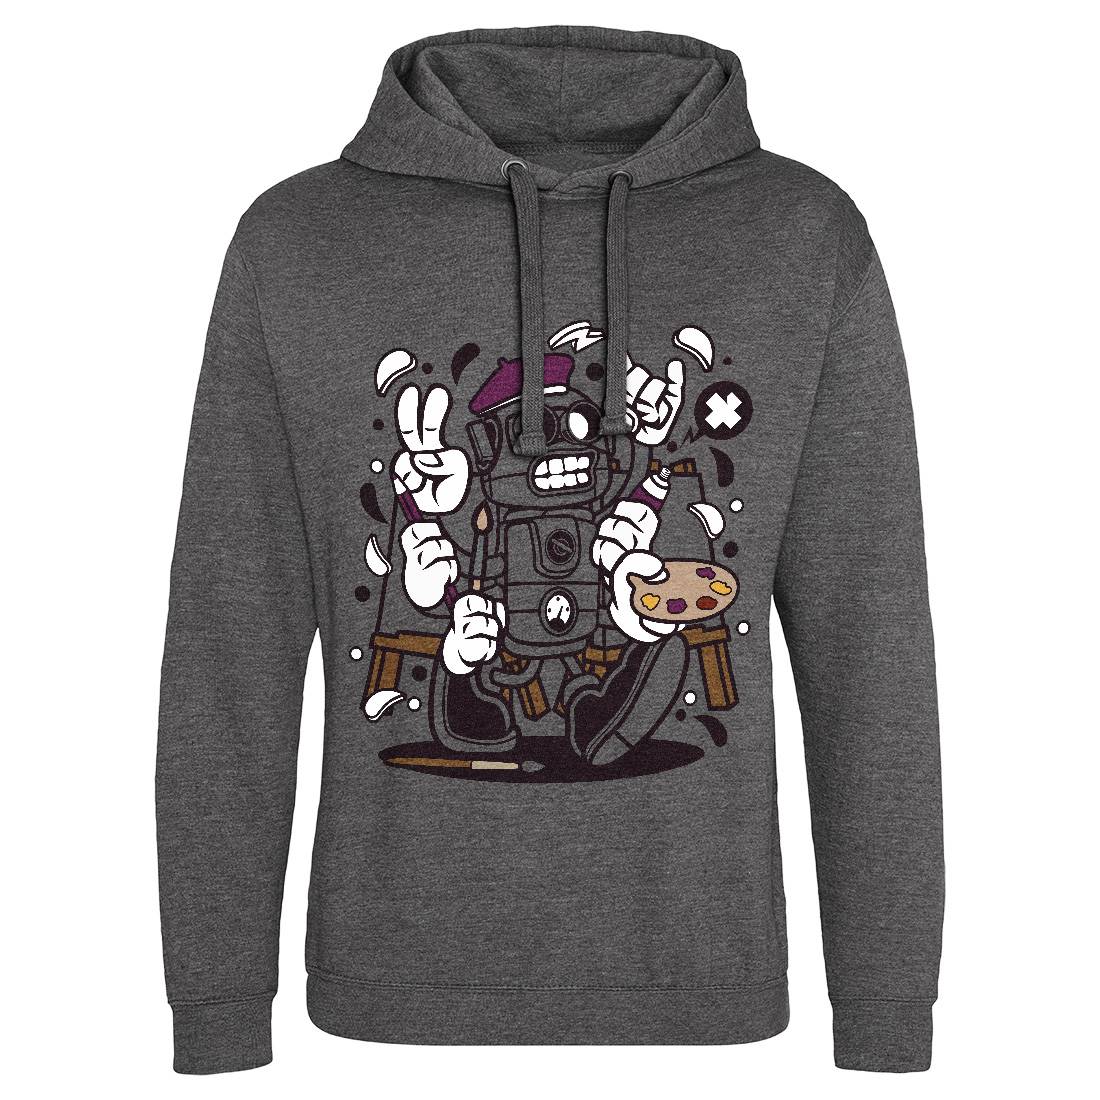 Painter Robot Mens Hoodie Without Pocket Retro C182